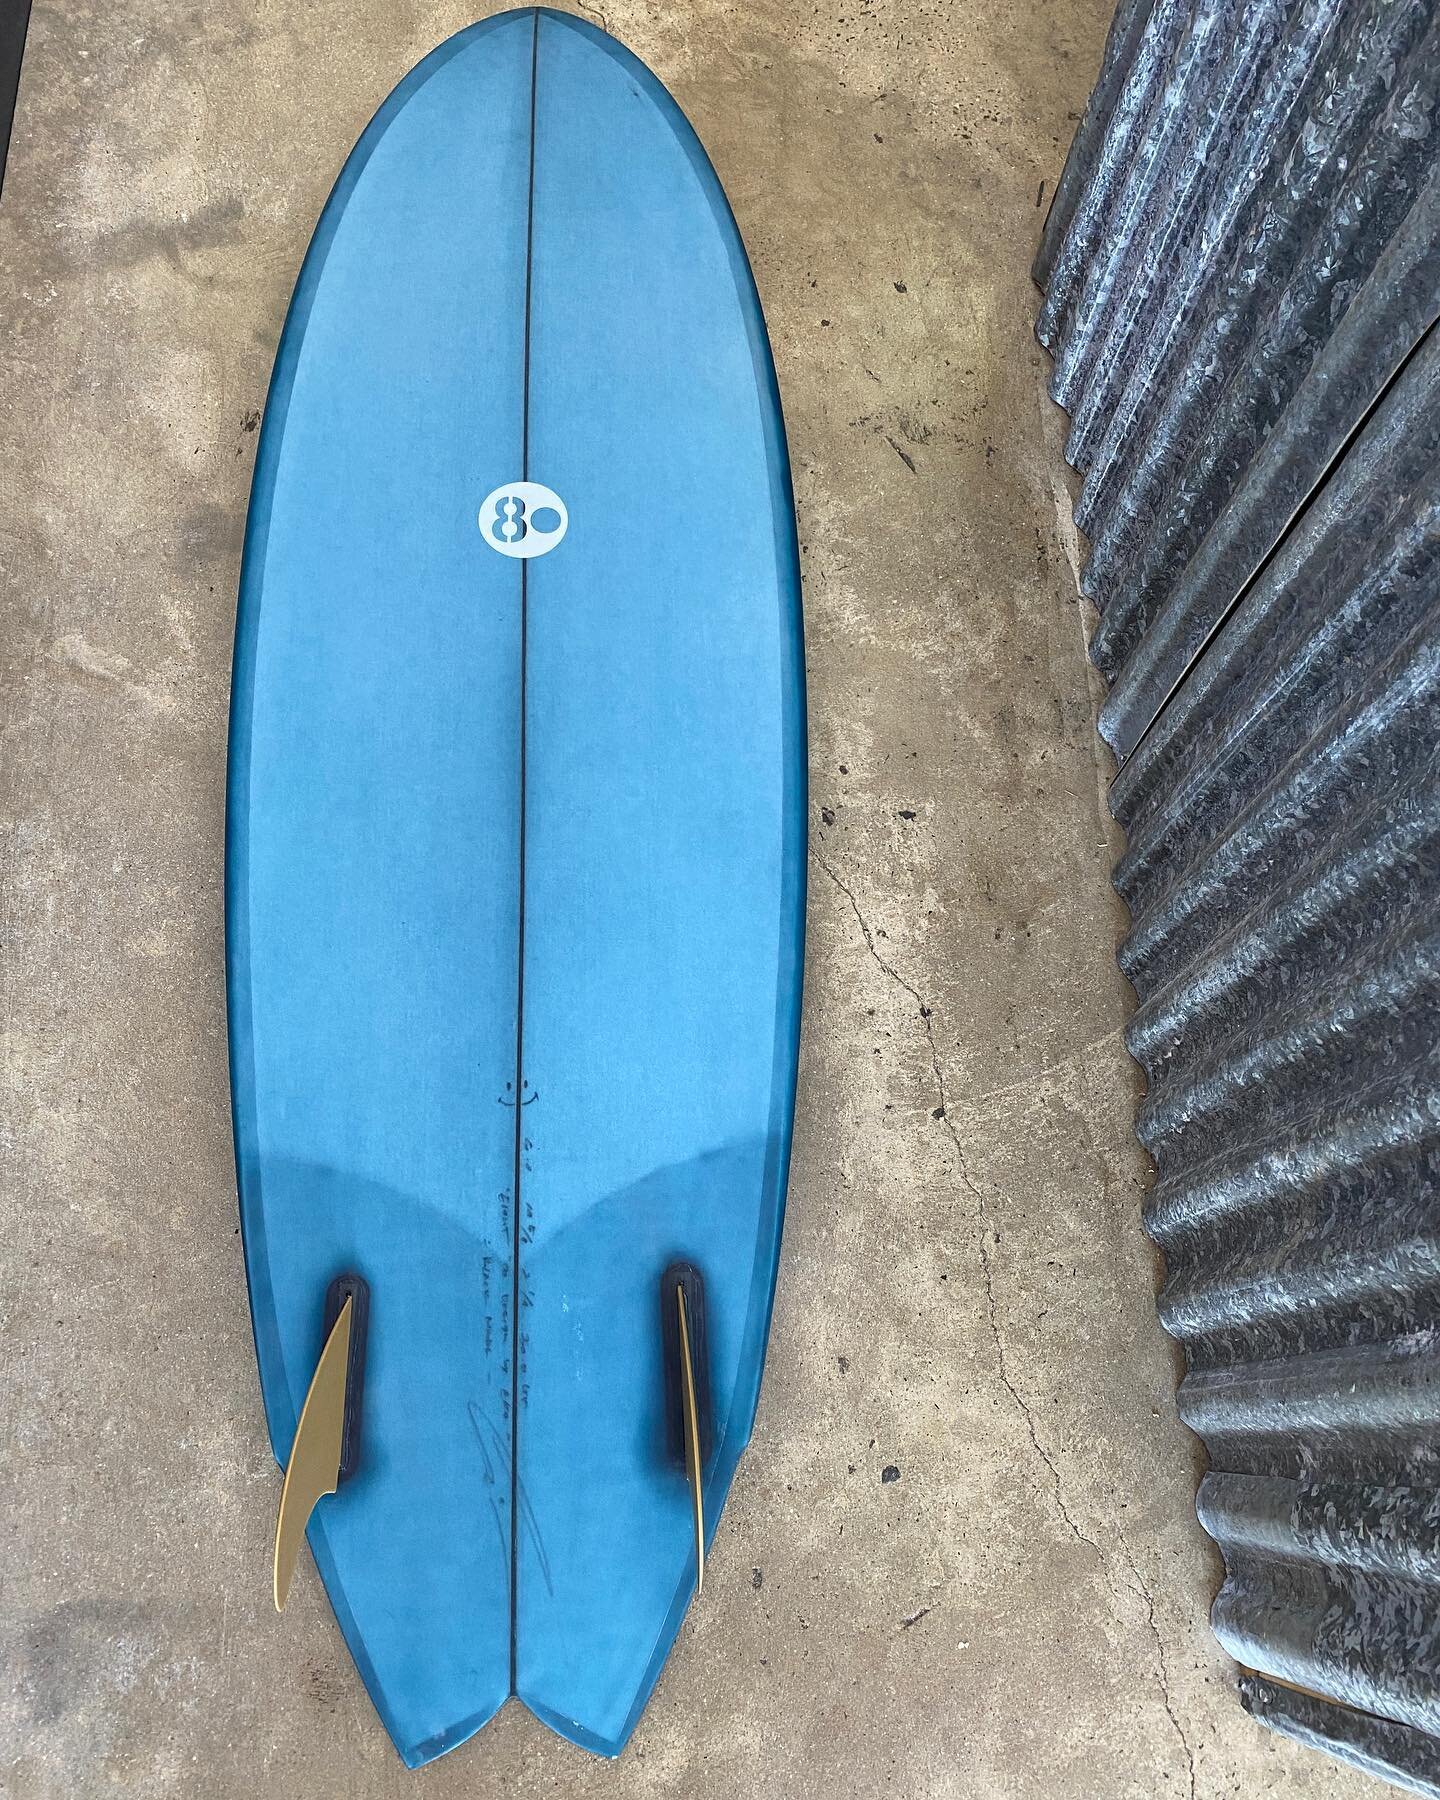 @80surfboards Black Model with Blue tint. For one happy customer 🤠